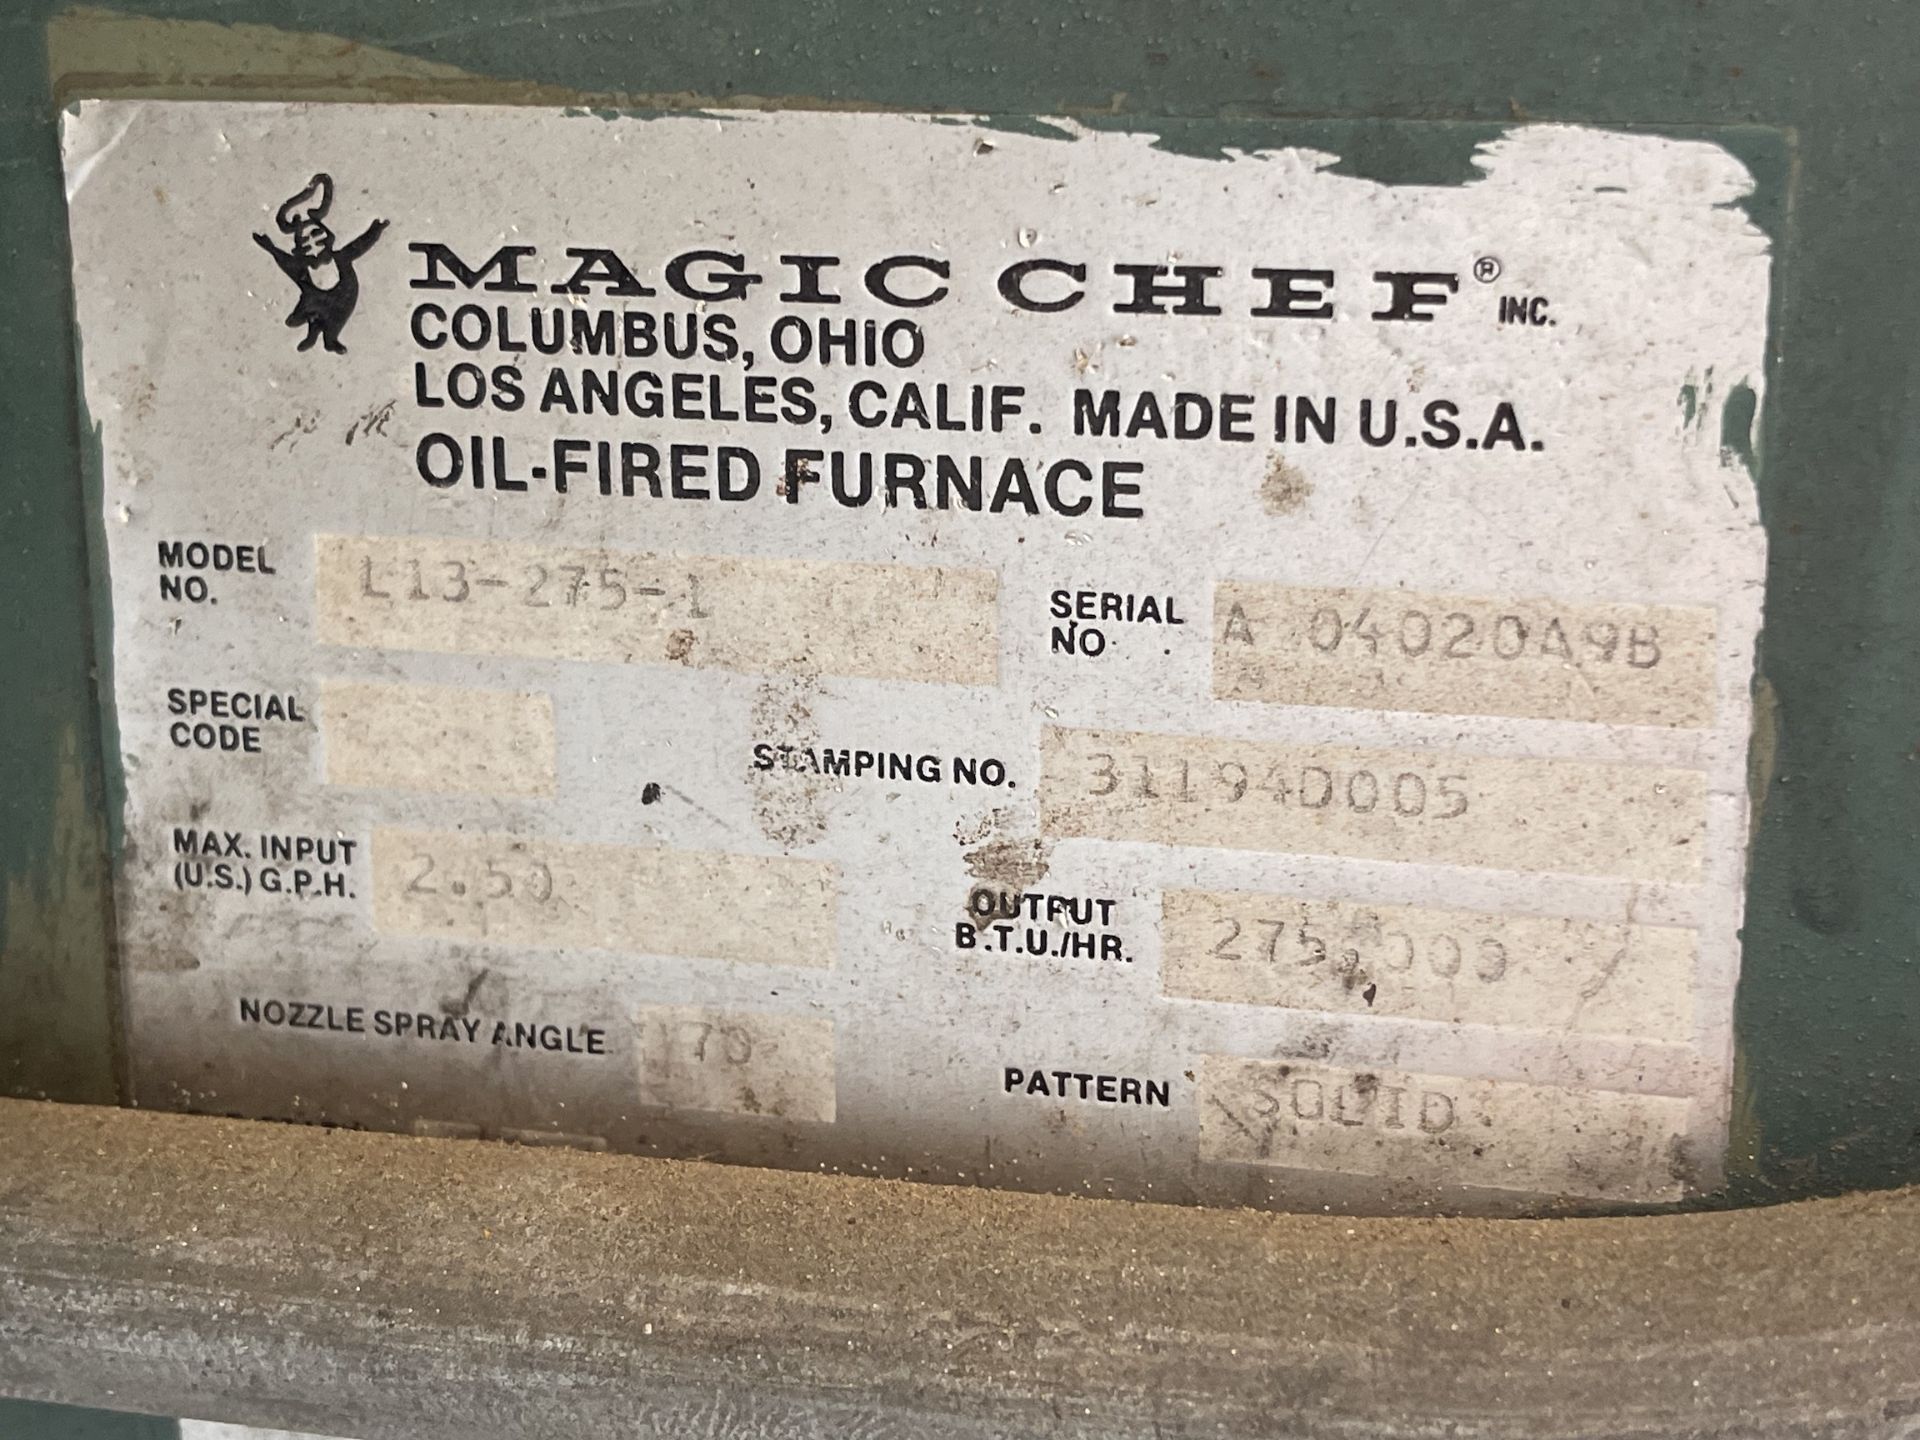 Oil-Fired Furnace - Upland - Image 3 of 4